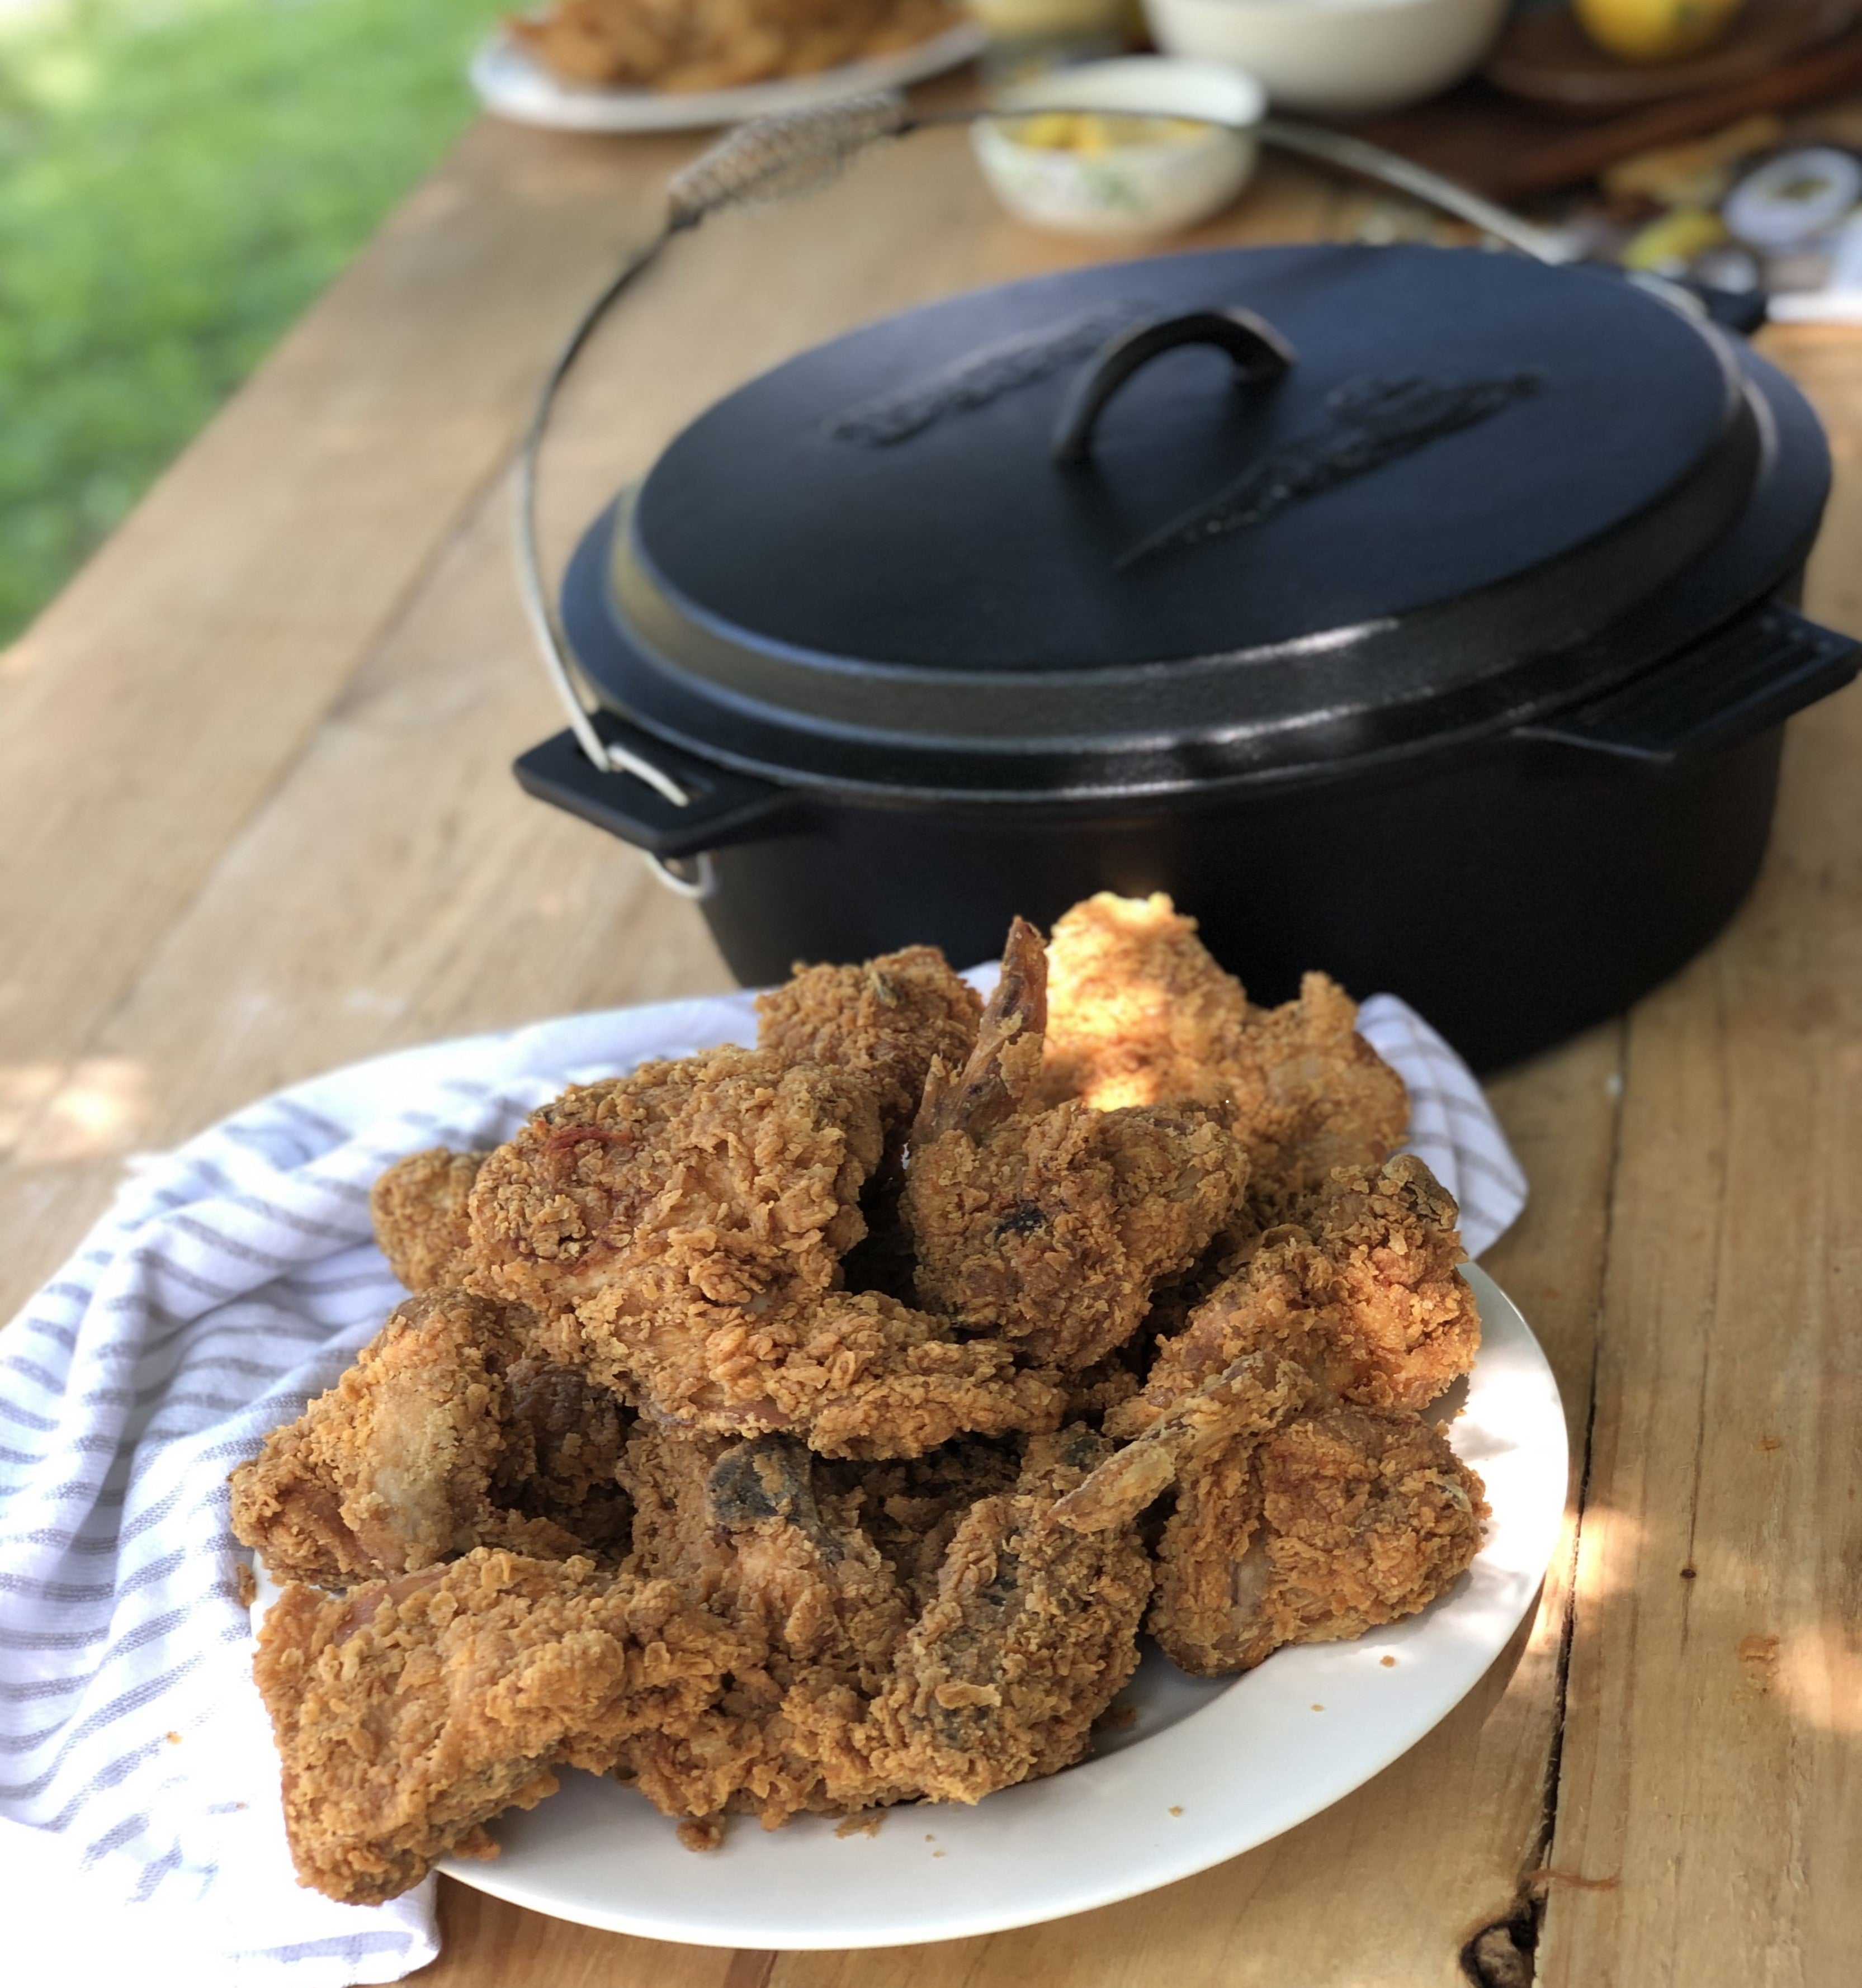 Bayou Classic 10-in Cast Iron Skillet